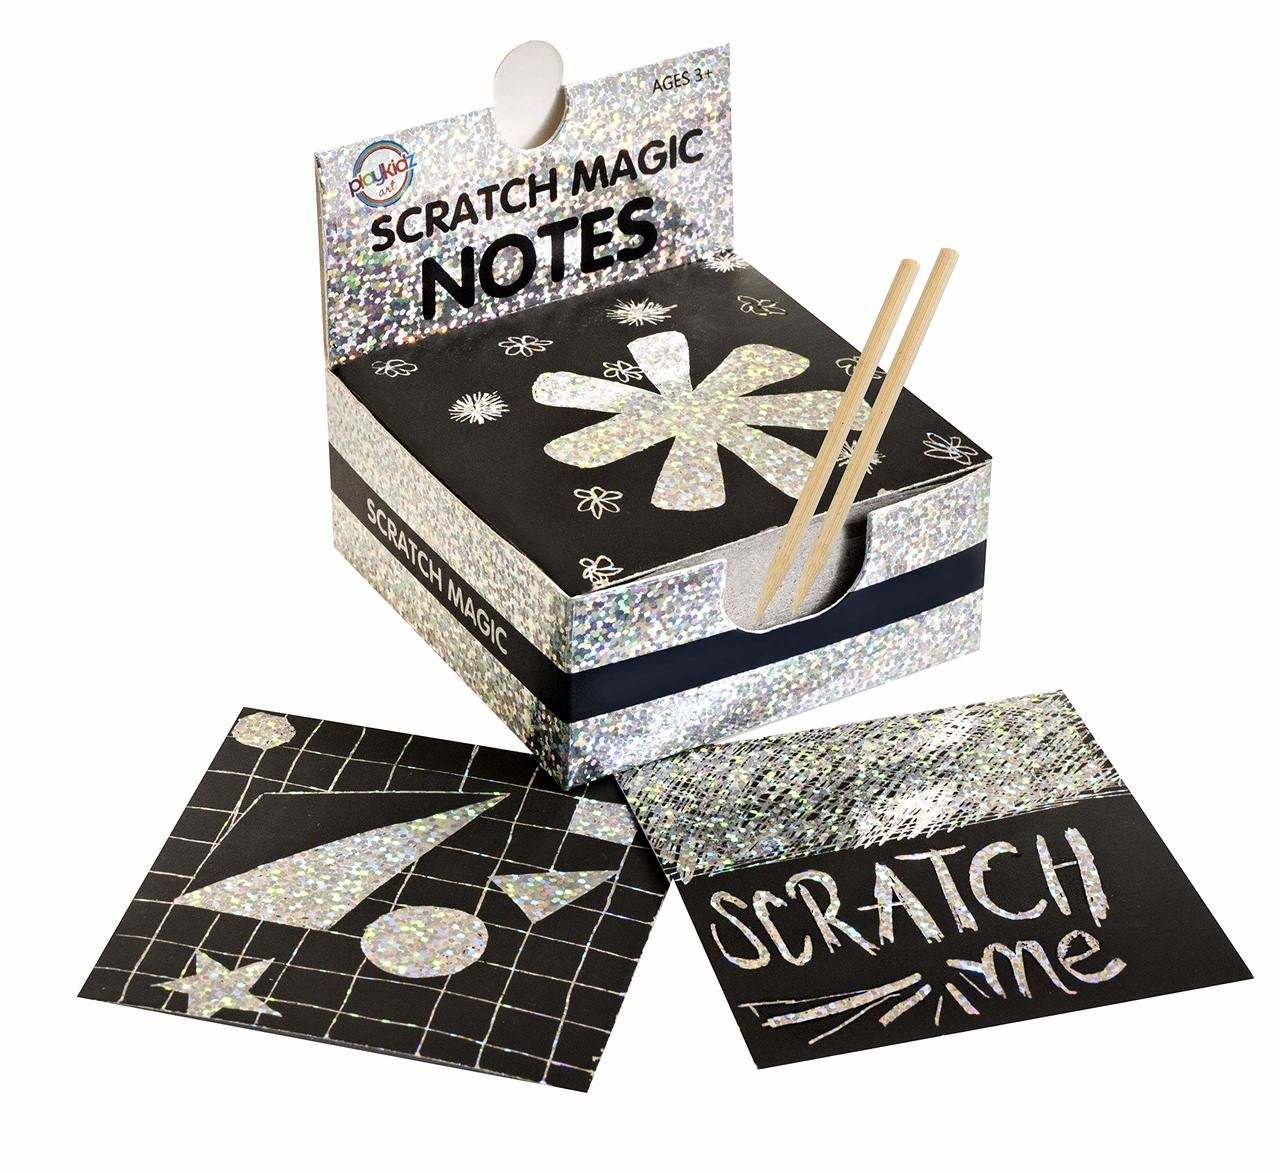 Scratch Paper Art Set Rainbow Card With Stylus Pen - Toys & Games